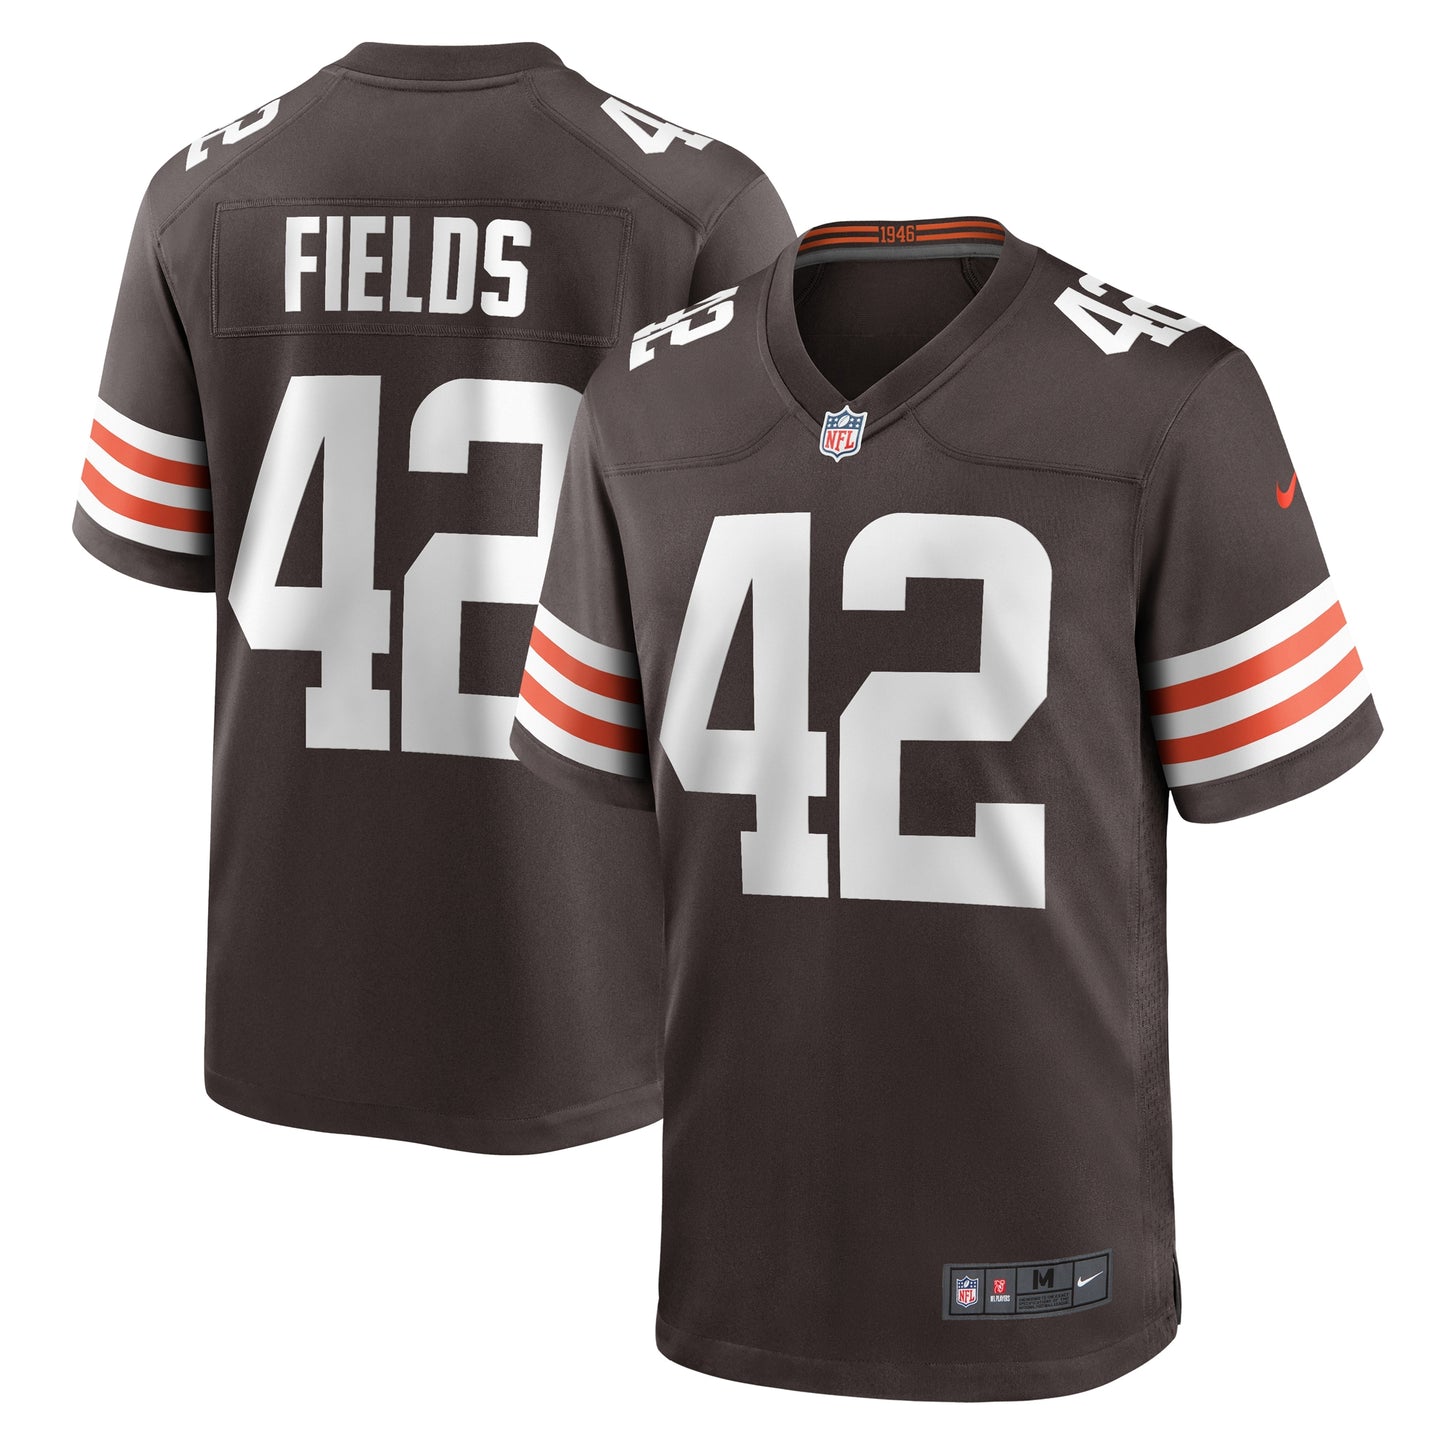 Tony Fields II Cleveland Browns Nike Team Game Jersey - Brown